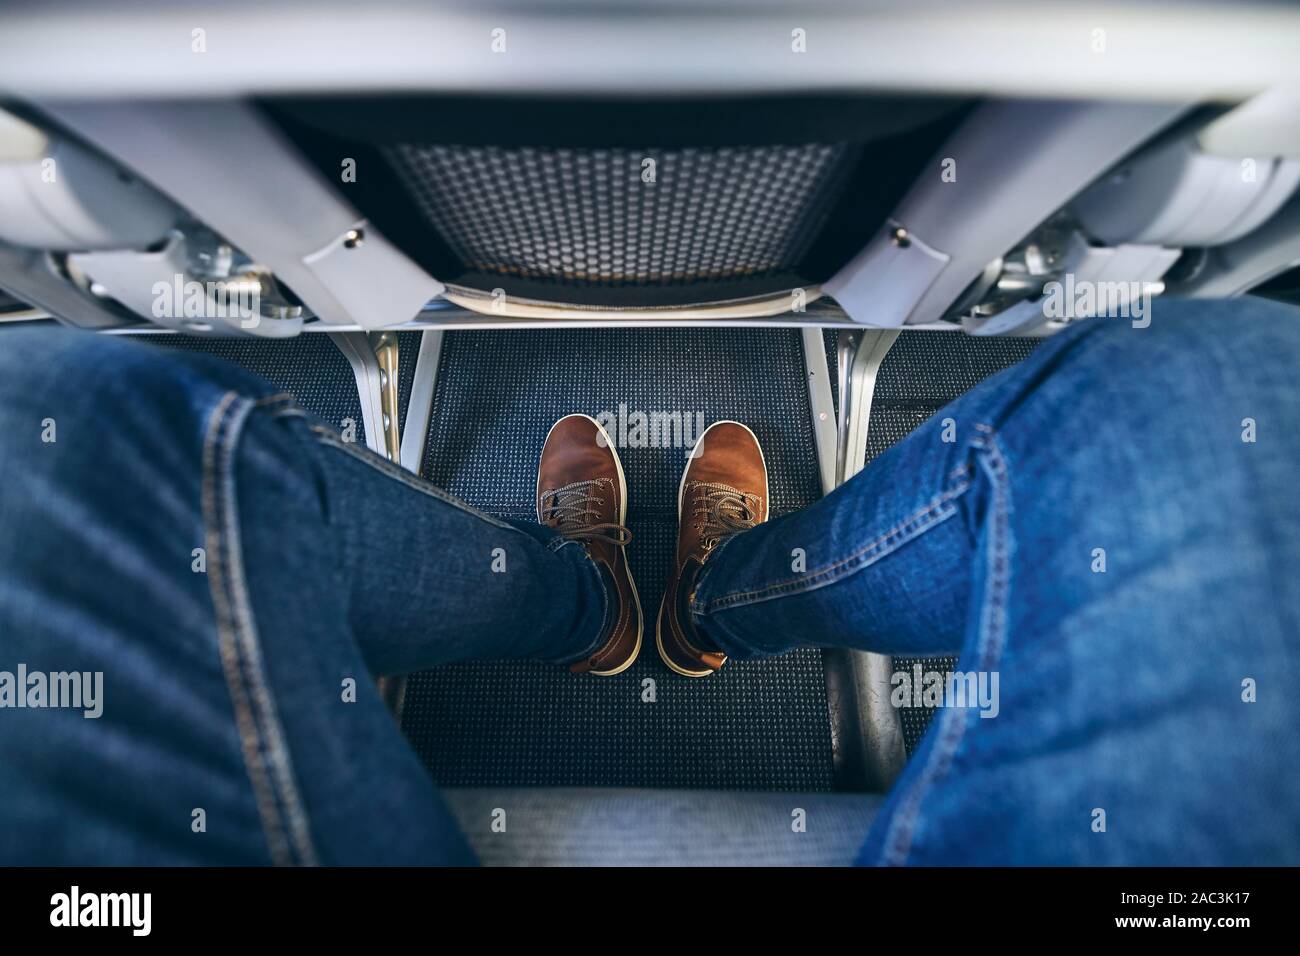 Legroom between seats in commercial airplane. Personal perspective of passenger on leg in economy class. Stock Photo